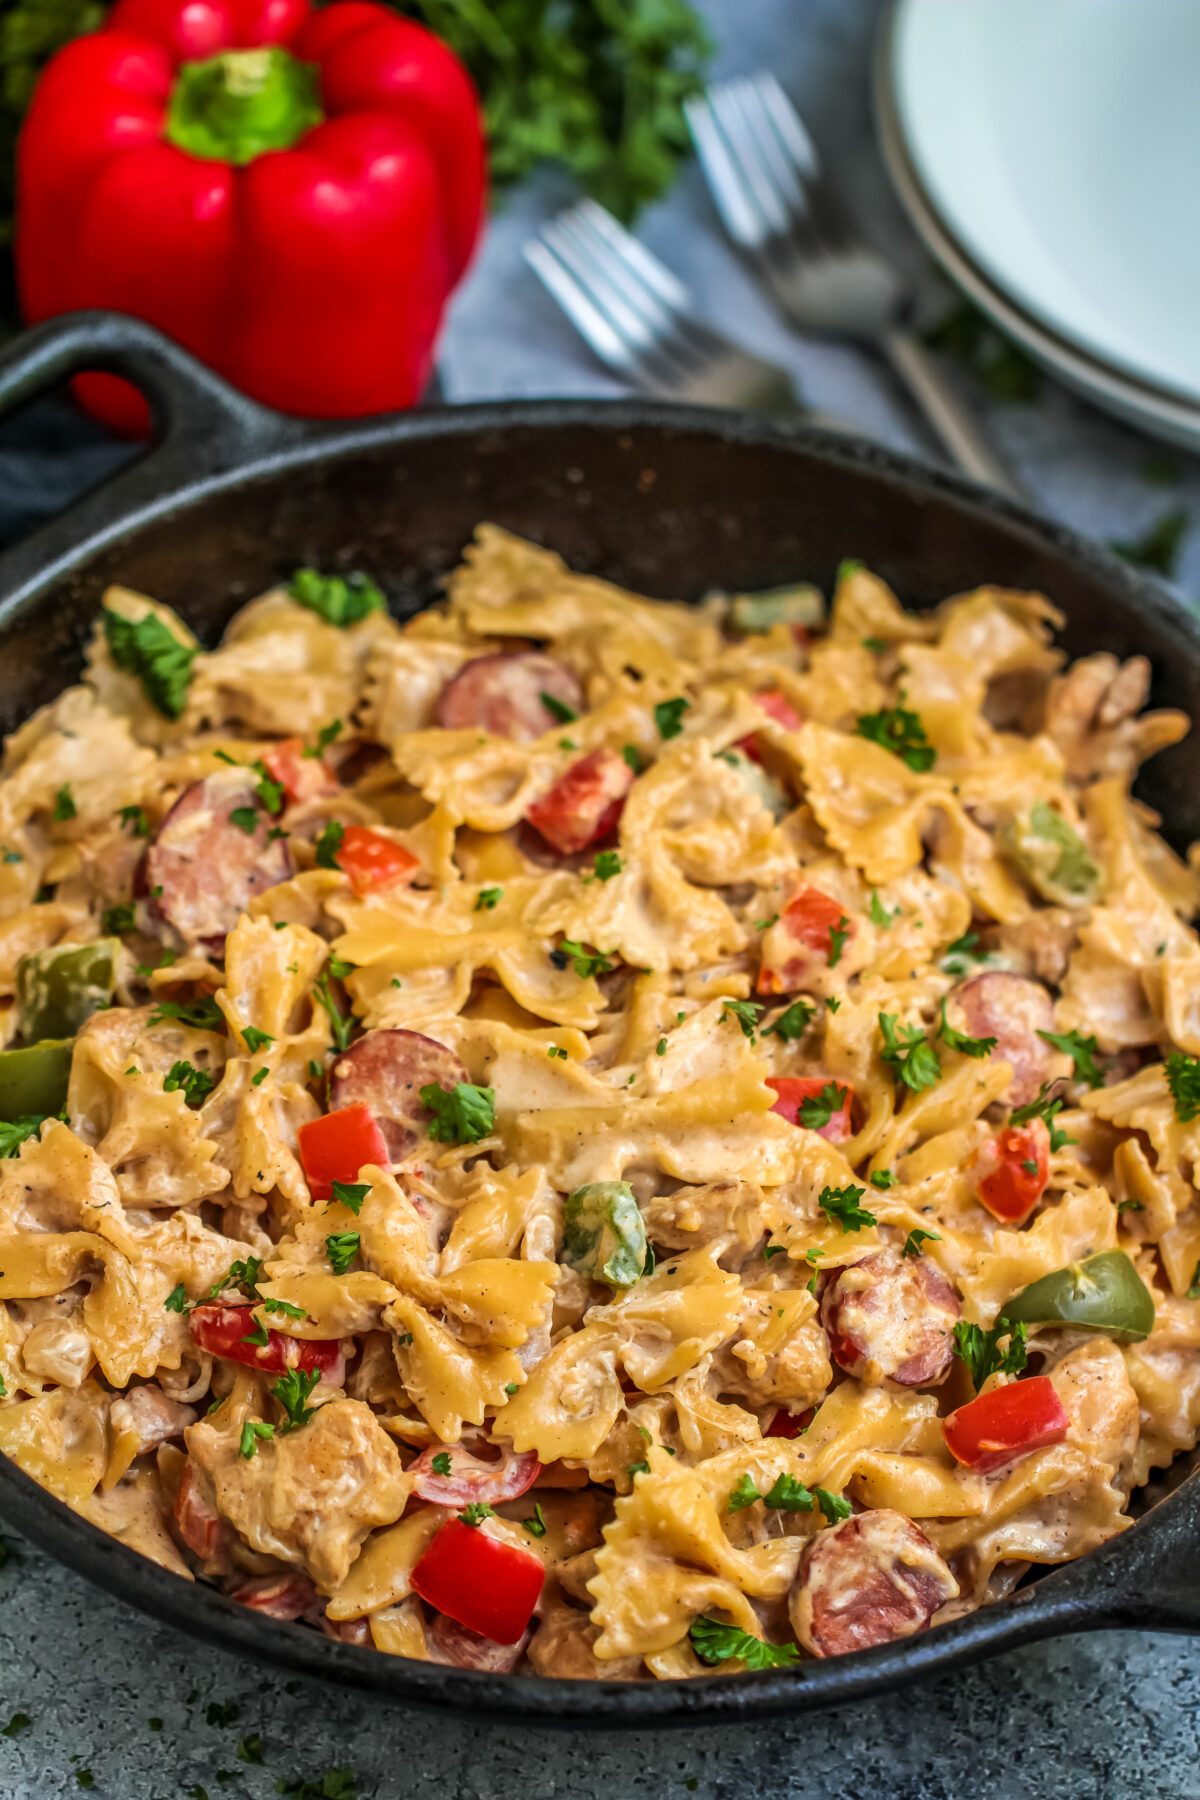 This Cajun Chicken Alfredo Pasta Recipe is a spicy take on a creamy classic. The best of both worlds in one easy dish with Andouille sausage!